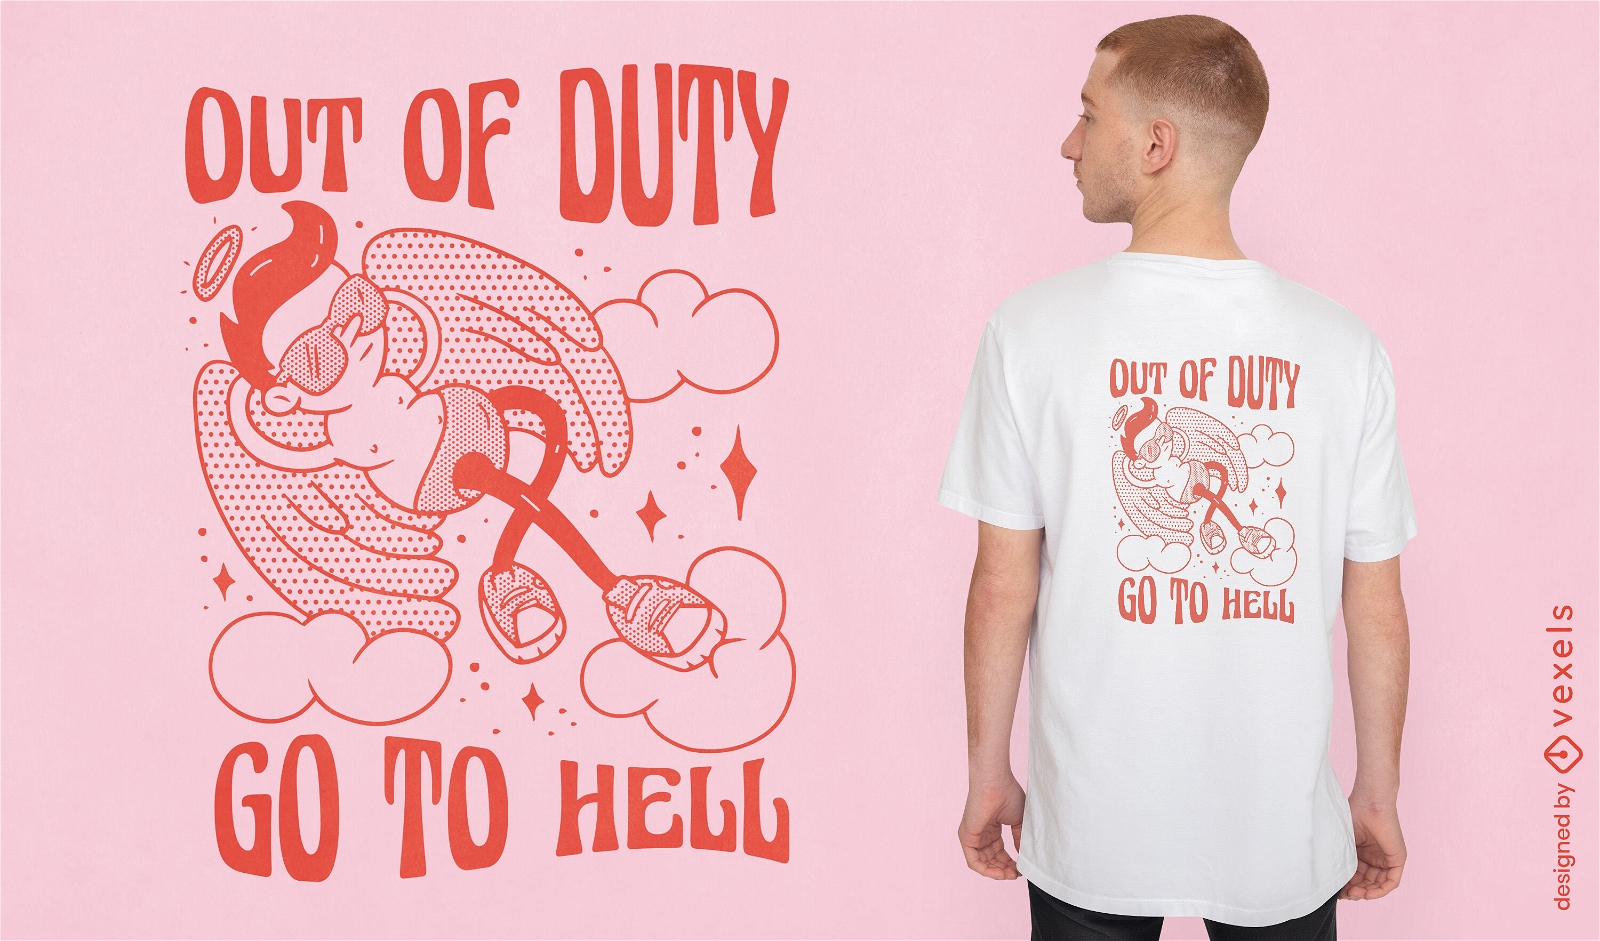 Out of duty angel t-shirt design